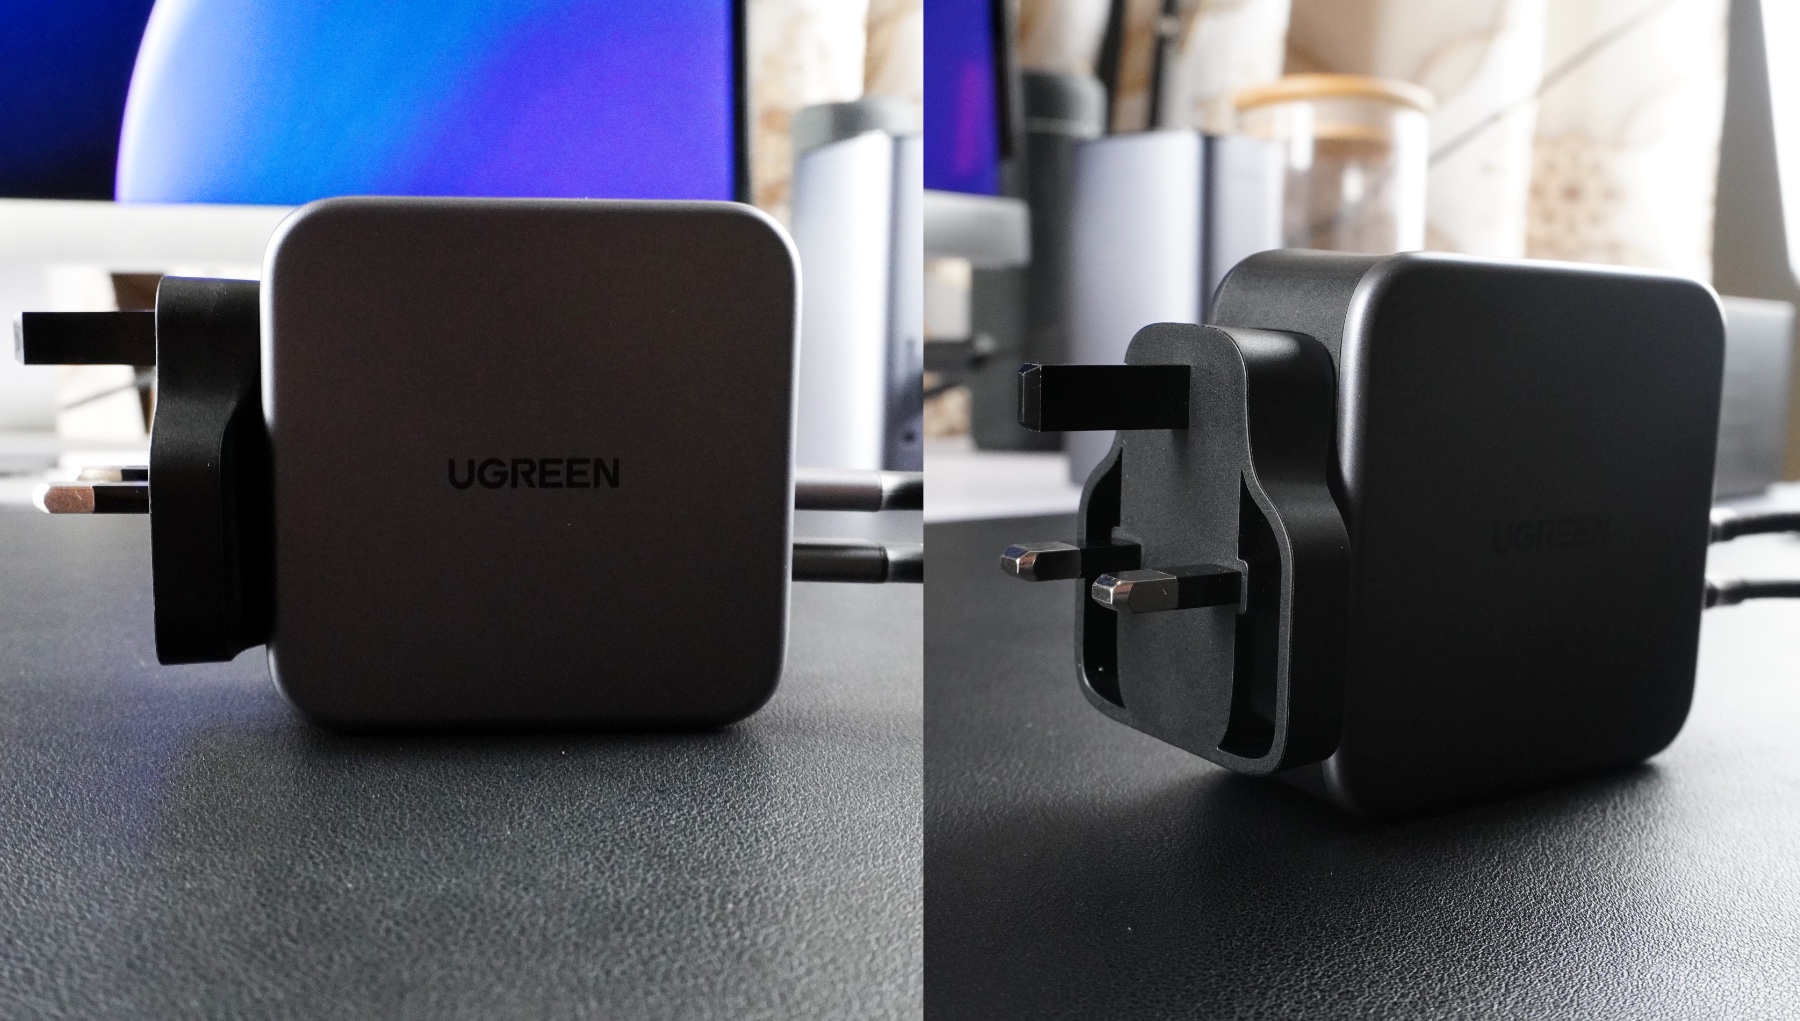 UGREEN 140W PD 3.1 USB Power Adapter Plus Others 